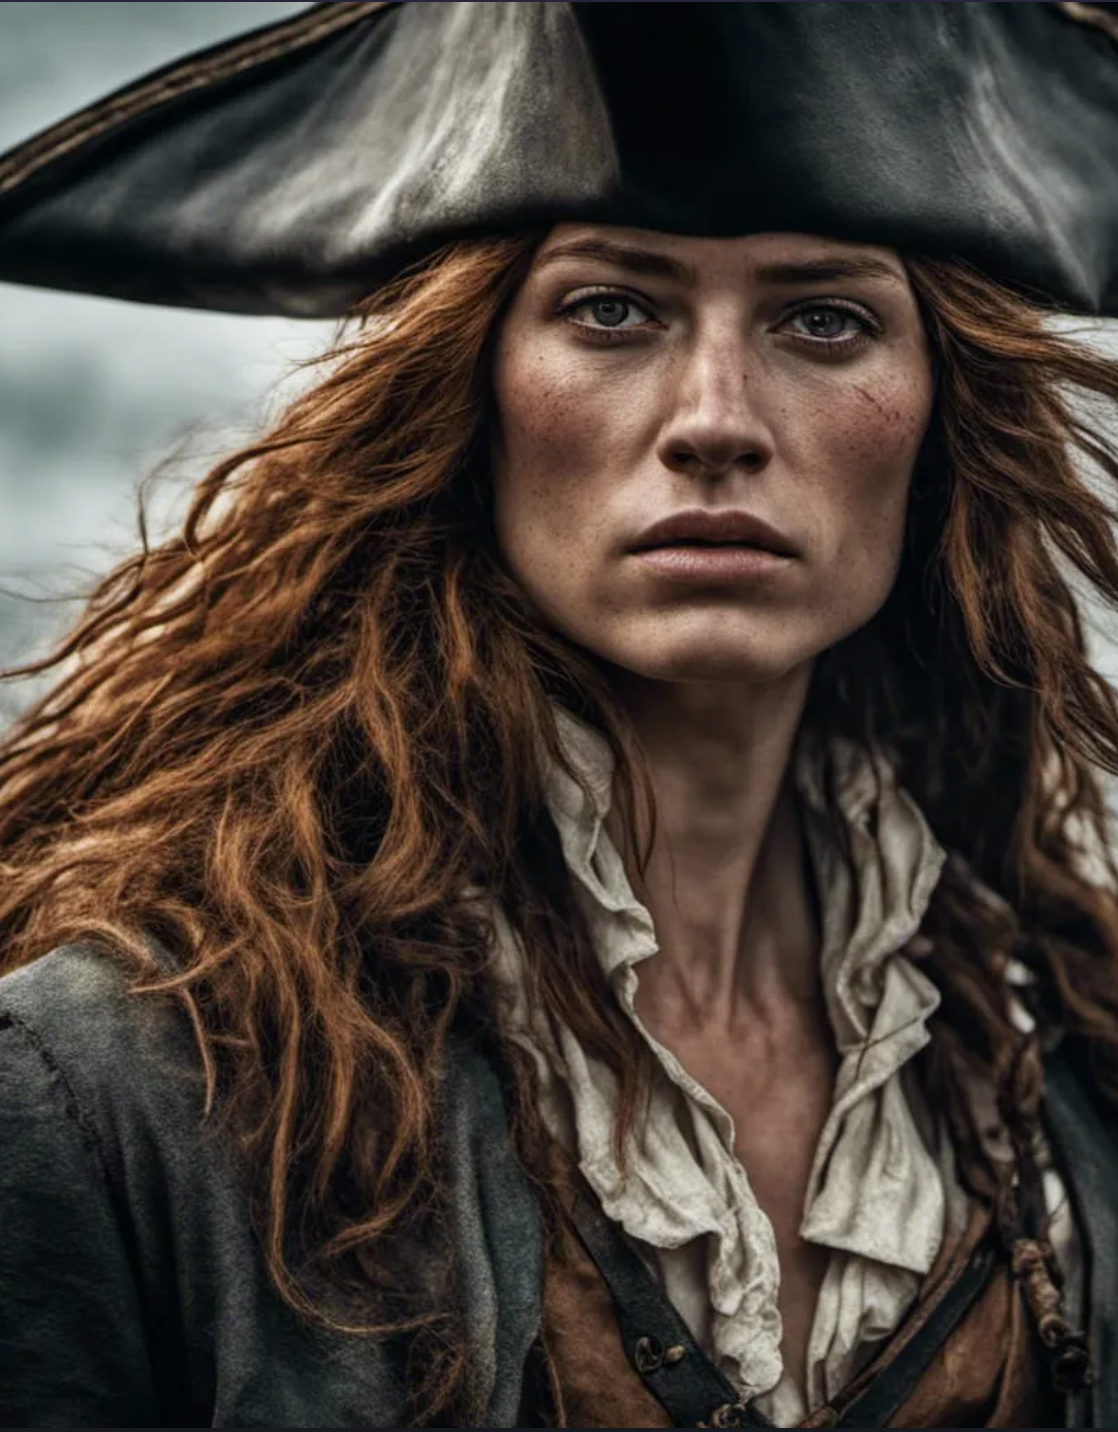 Anne Bonny: Pirate Queen of the Caribbean